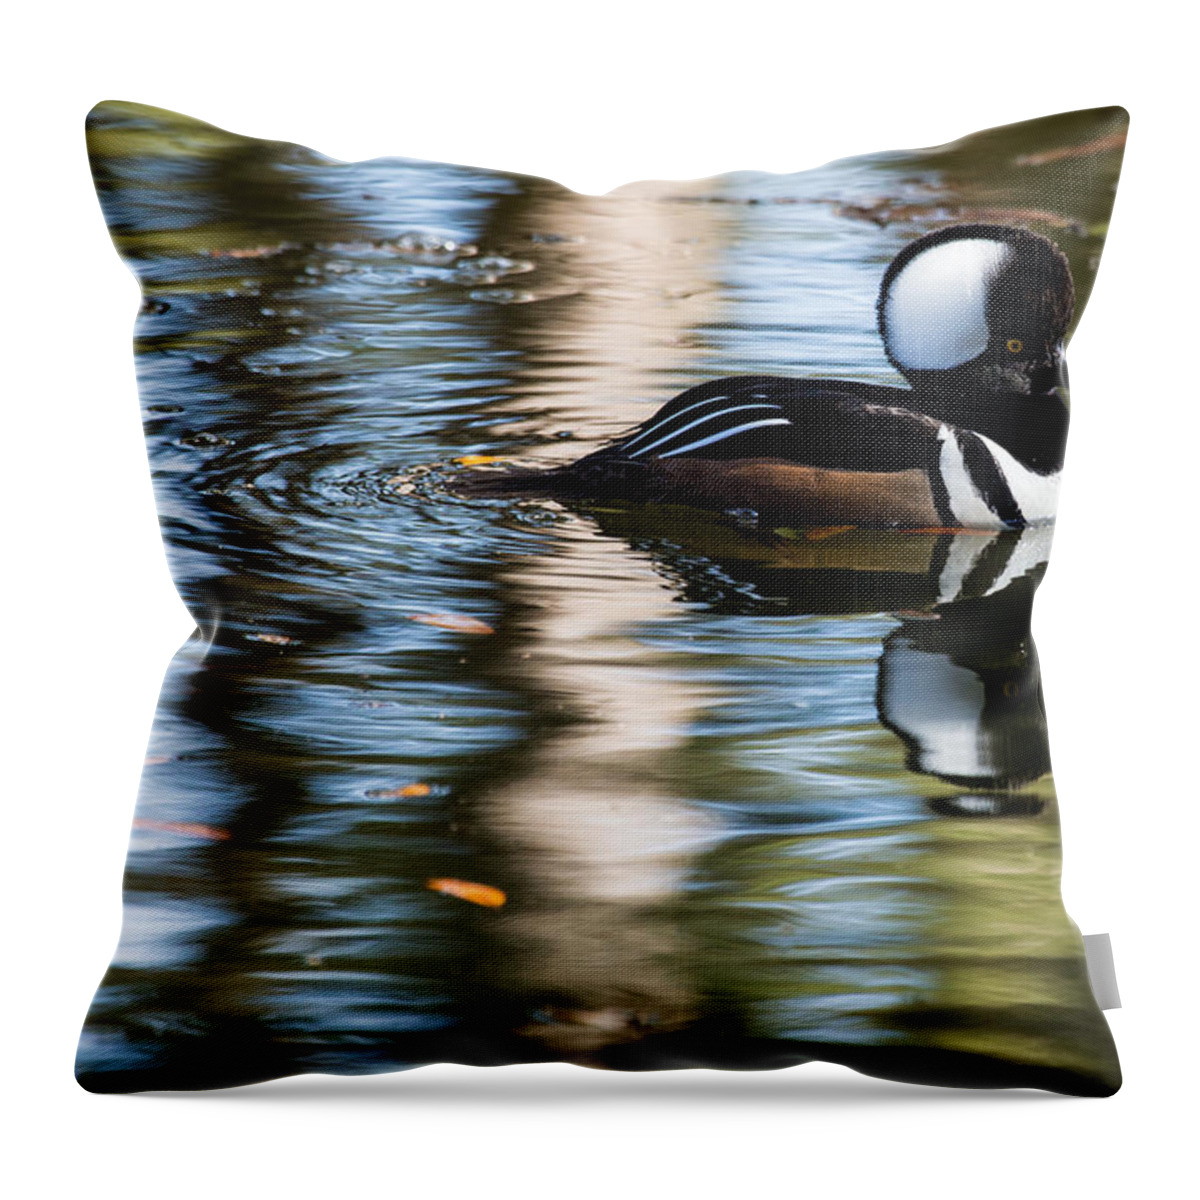 Hooded Throw Pillow featuring the photograph Hooded Merganser 5577 by Brent L Ander